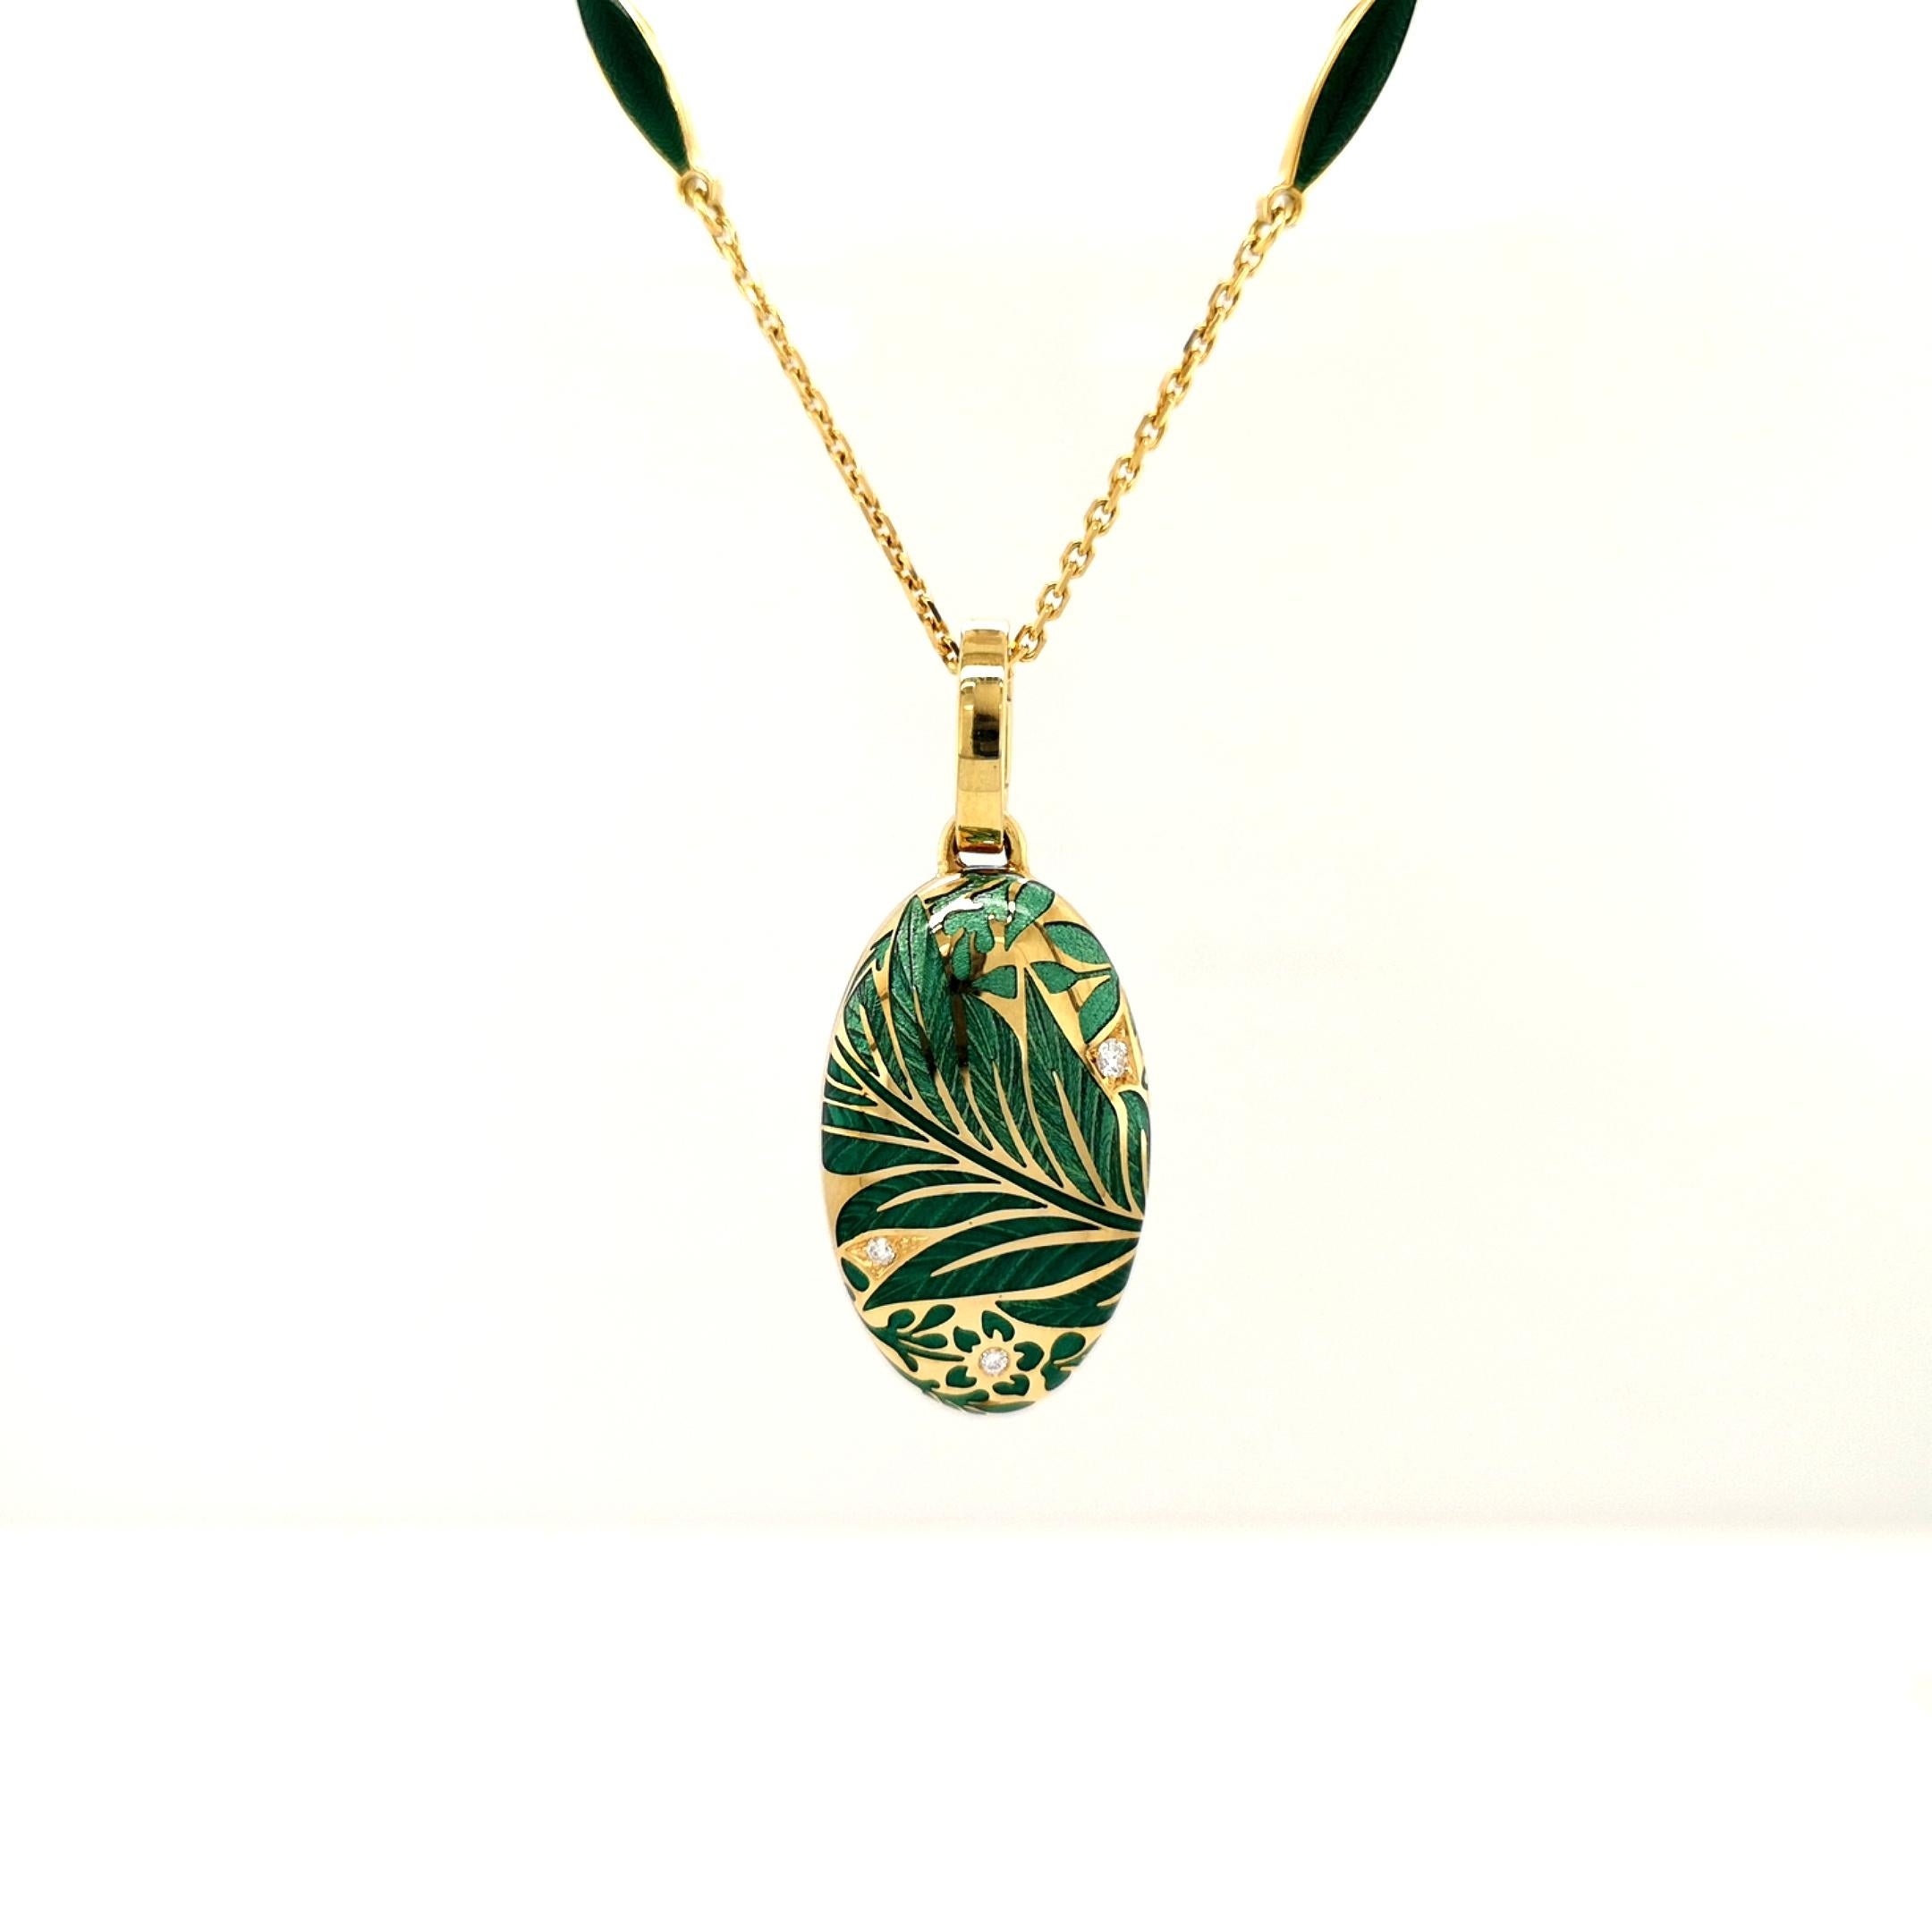 Victor Mayer oval pendant locket 18k yellow gold, emerald turquoise vitreous enamel, 3 diamonds, total 0.04 ct G VS, brilliant cut, measurements app. 24.5 mm x 15.0 mm

About the creator Victor Mayer
Victor Mayer is internationally renowned for